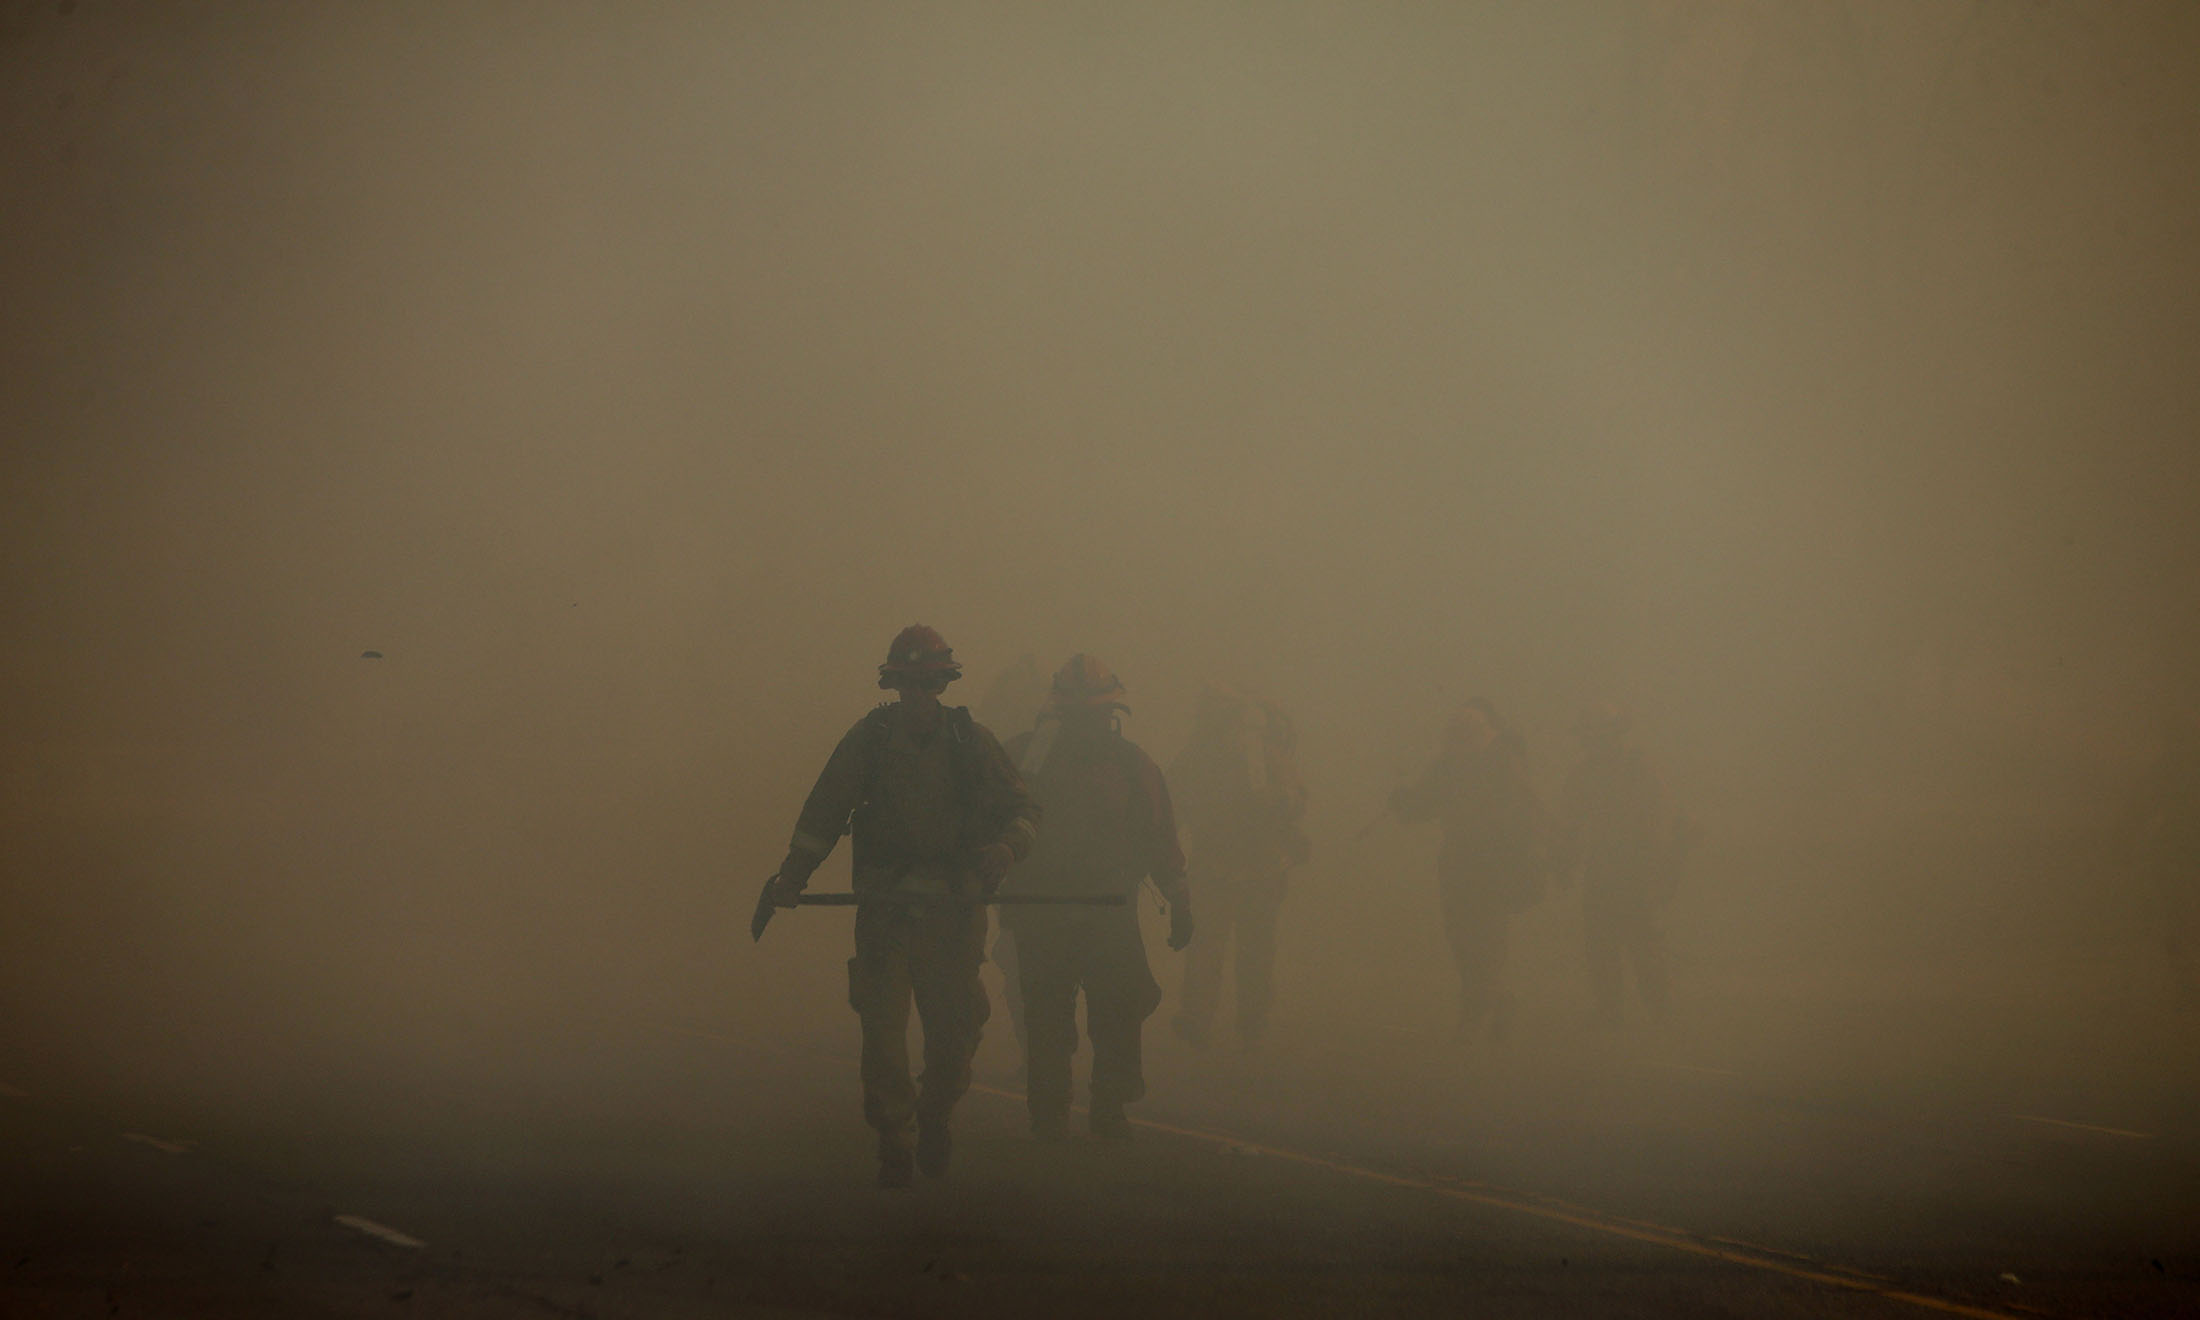  A inmate brush crew makes their way through the heavy smoke as they head to fight the Riverbottom fire Thursday in Riverside, CA. December 21, 2017. 
 